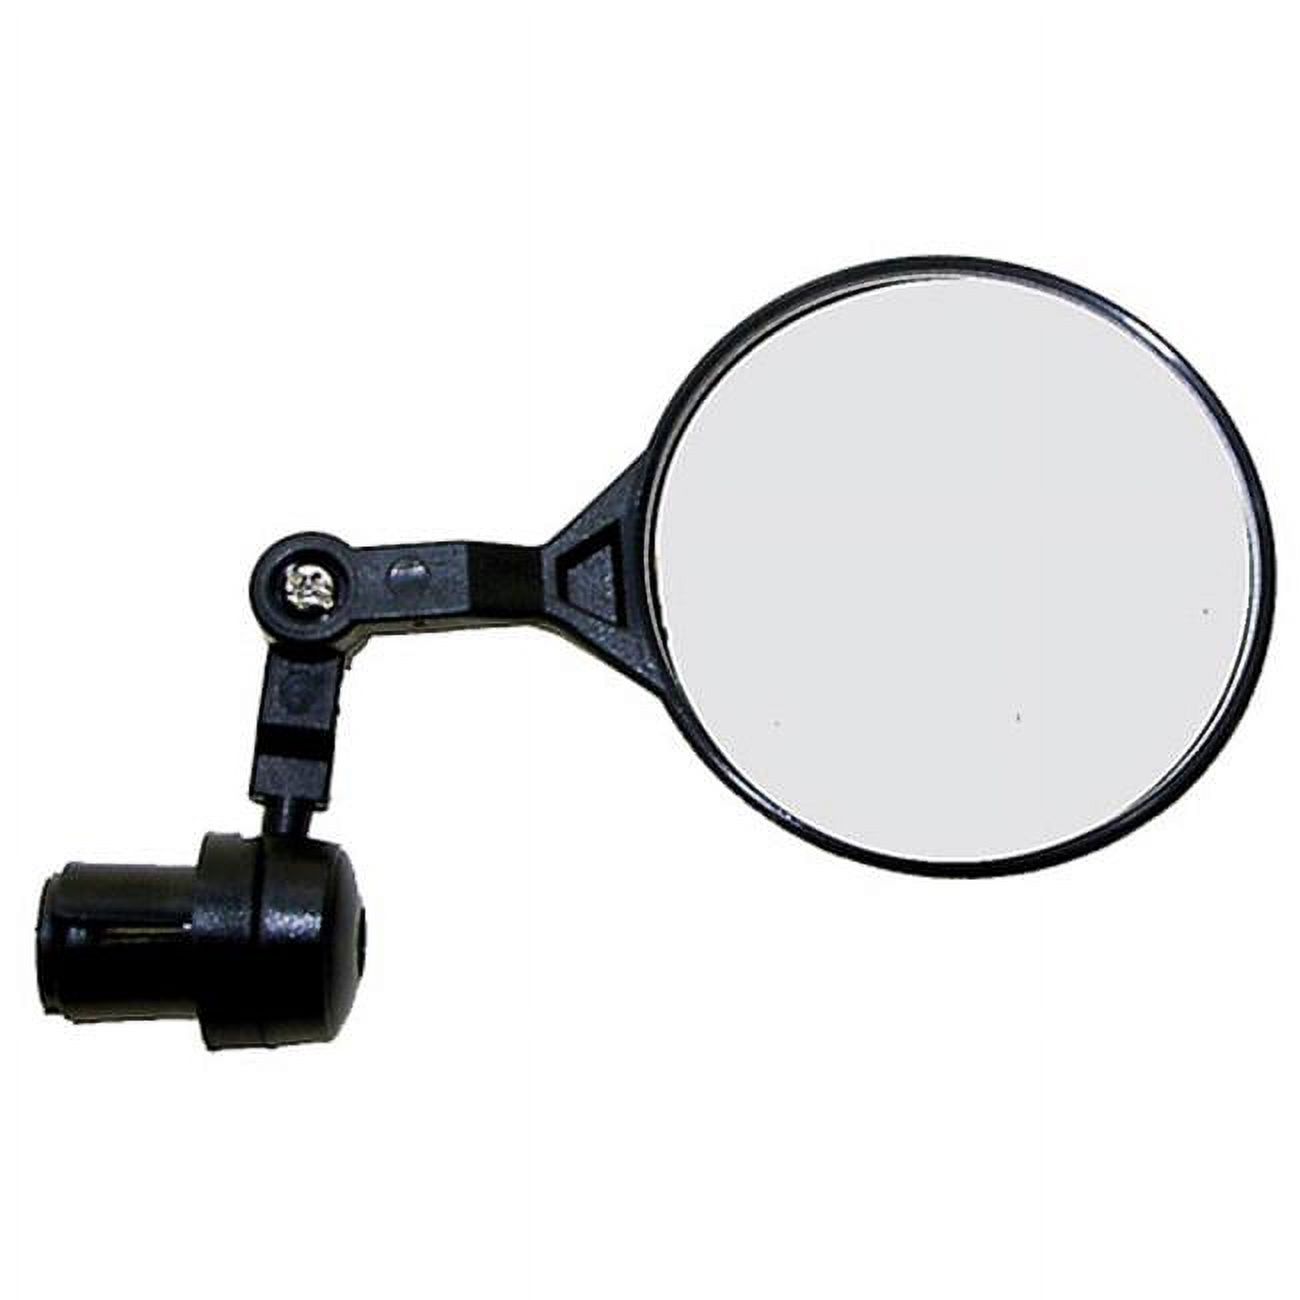 M-Wave Max Spy 3D Bicycle Mirror - image 1 of 2